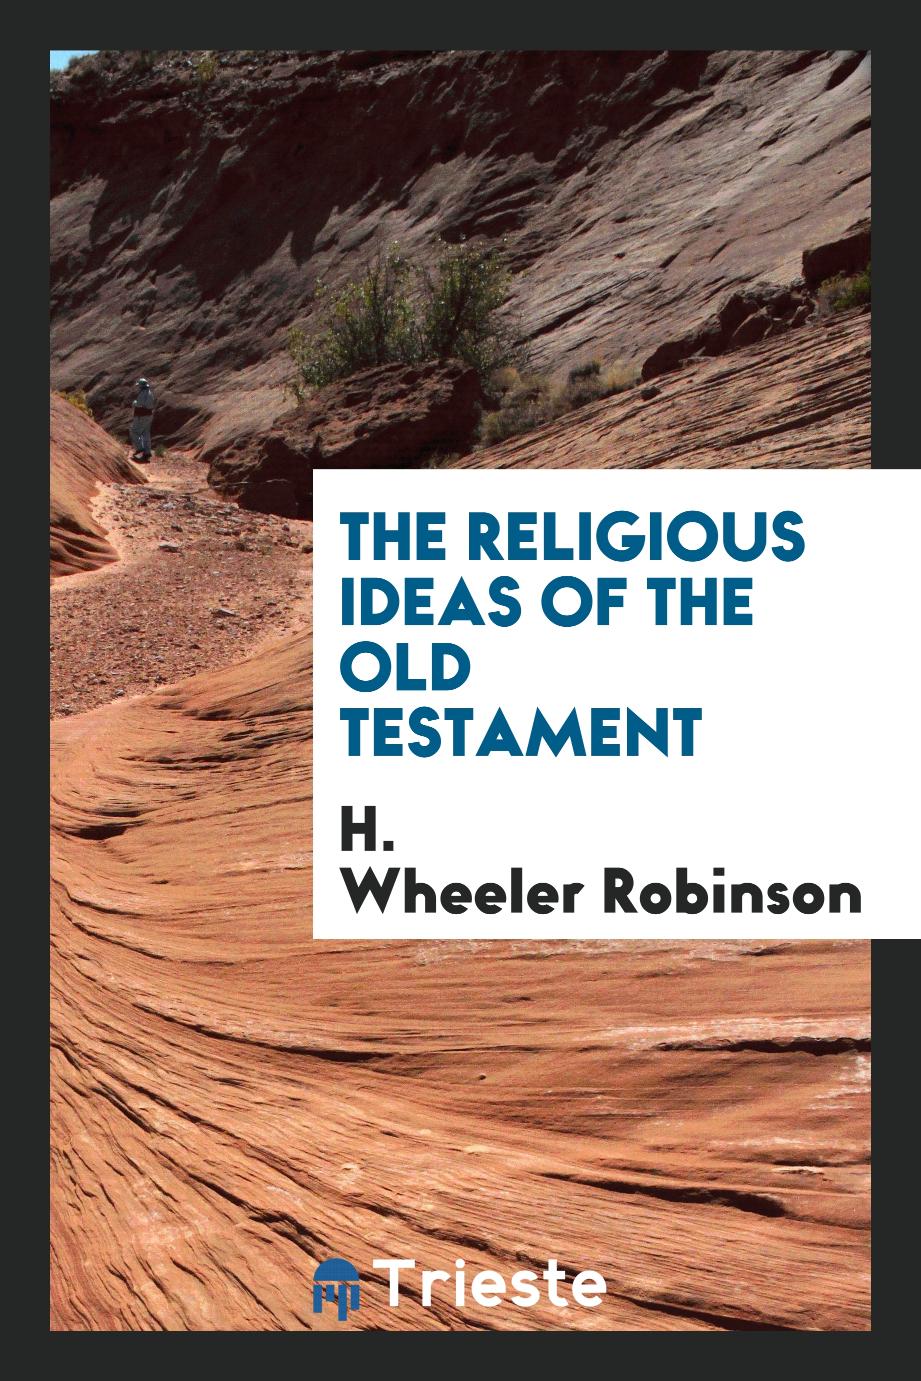 The Religious Ideas of the Old Testament